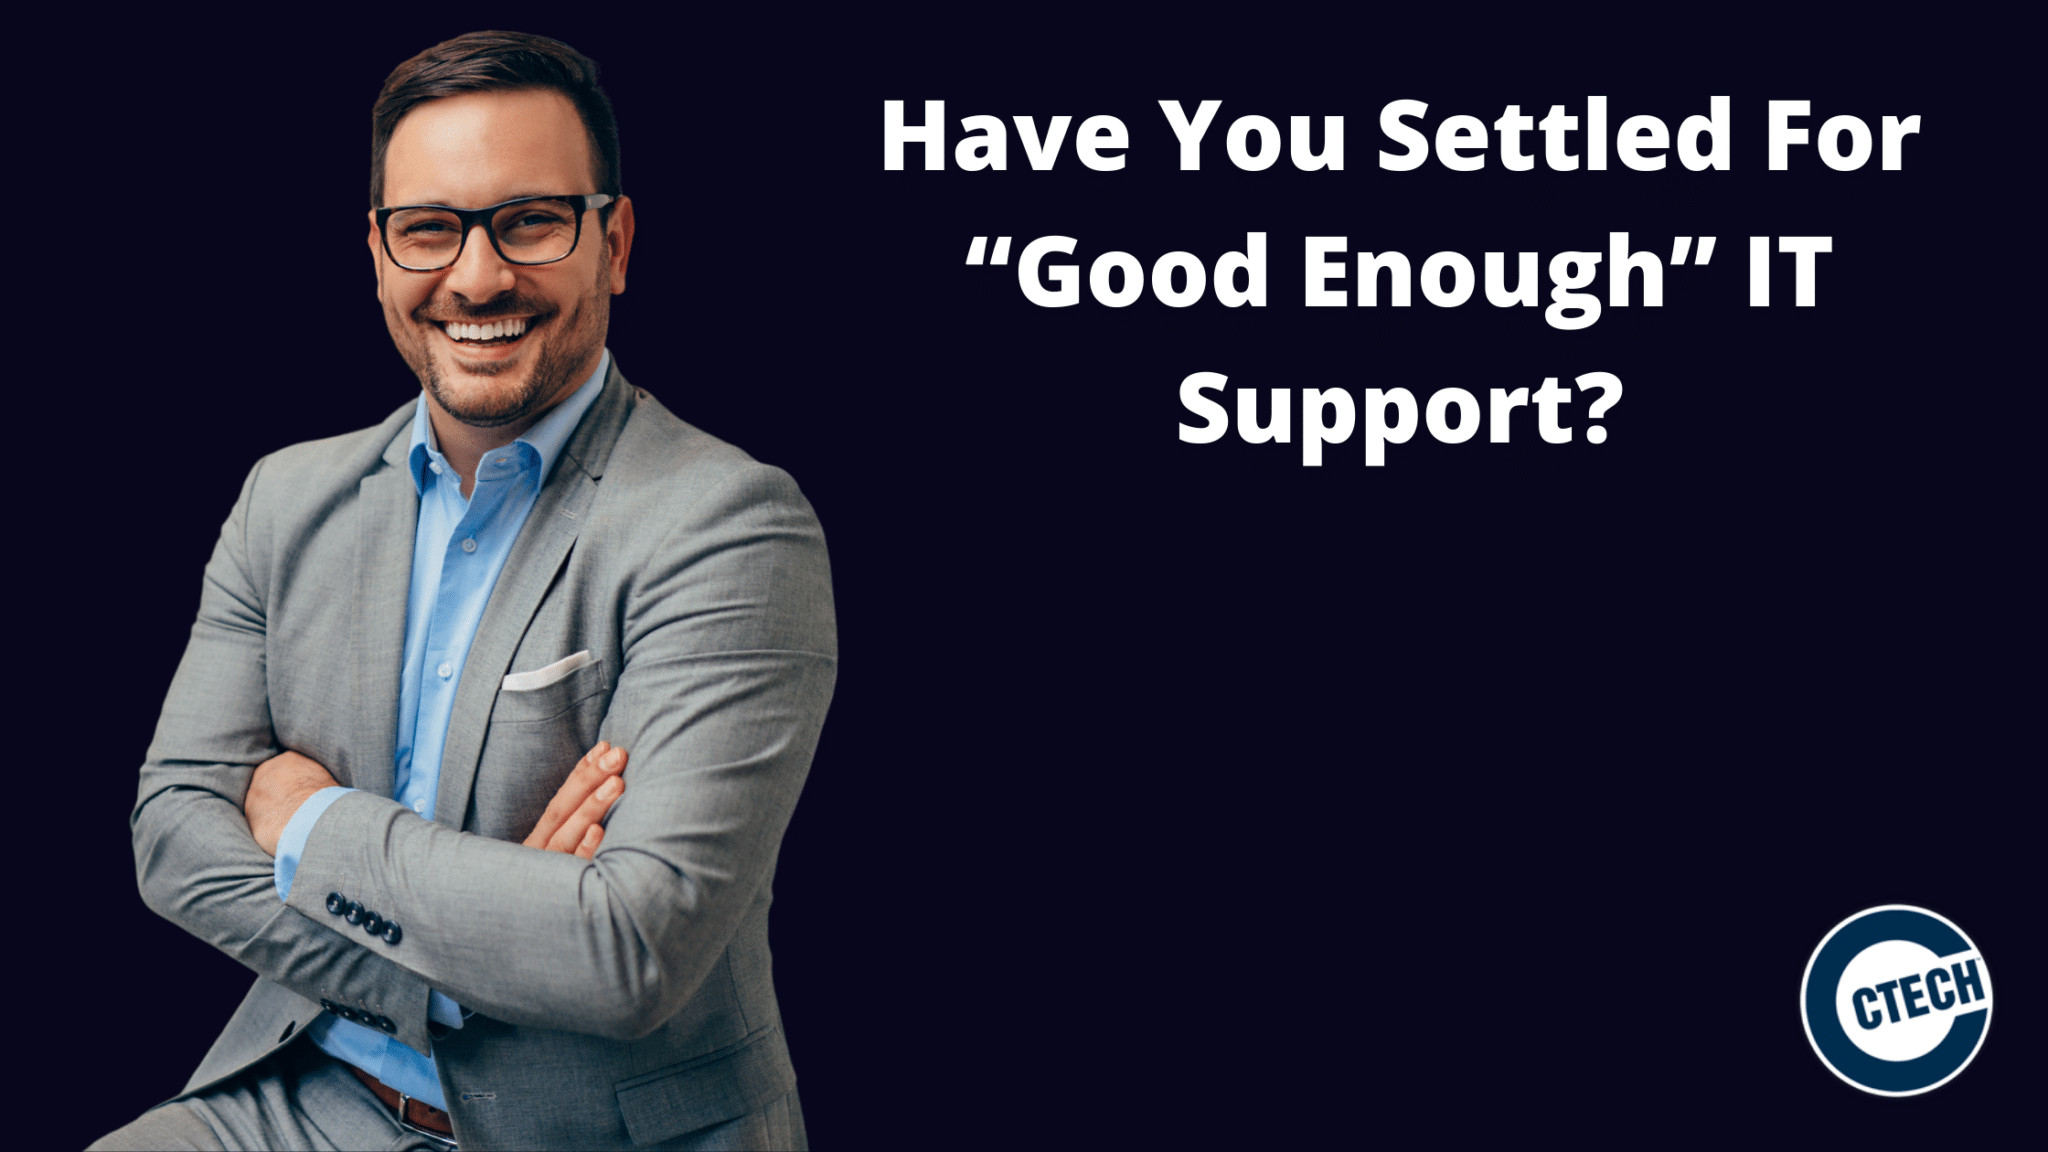 Have You Settled For “Good Enough” IT Support?